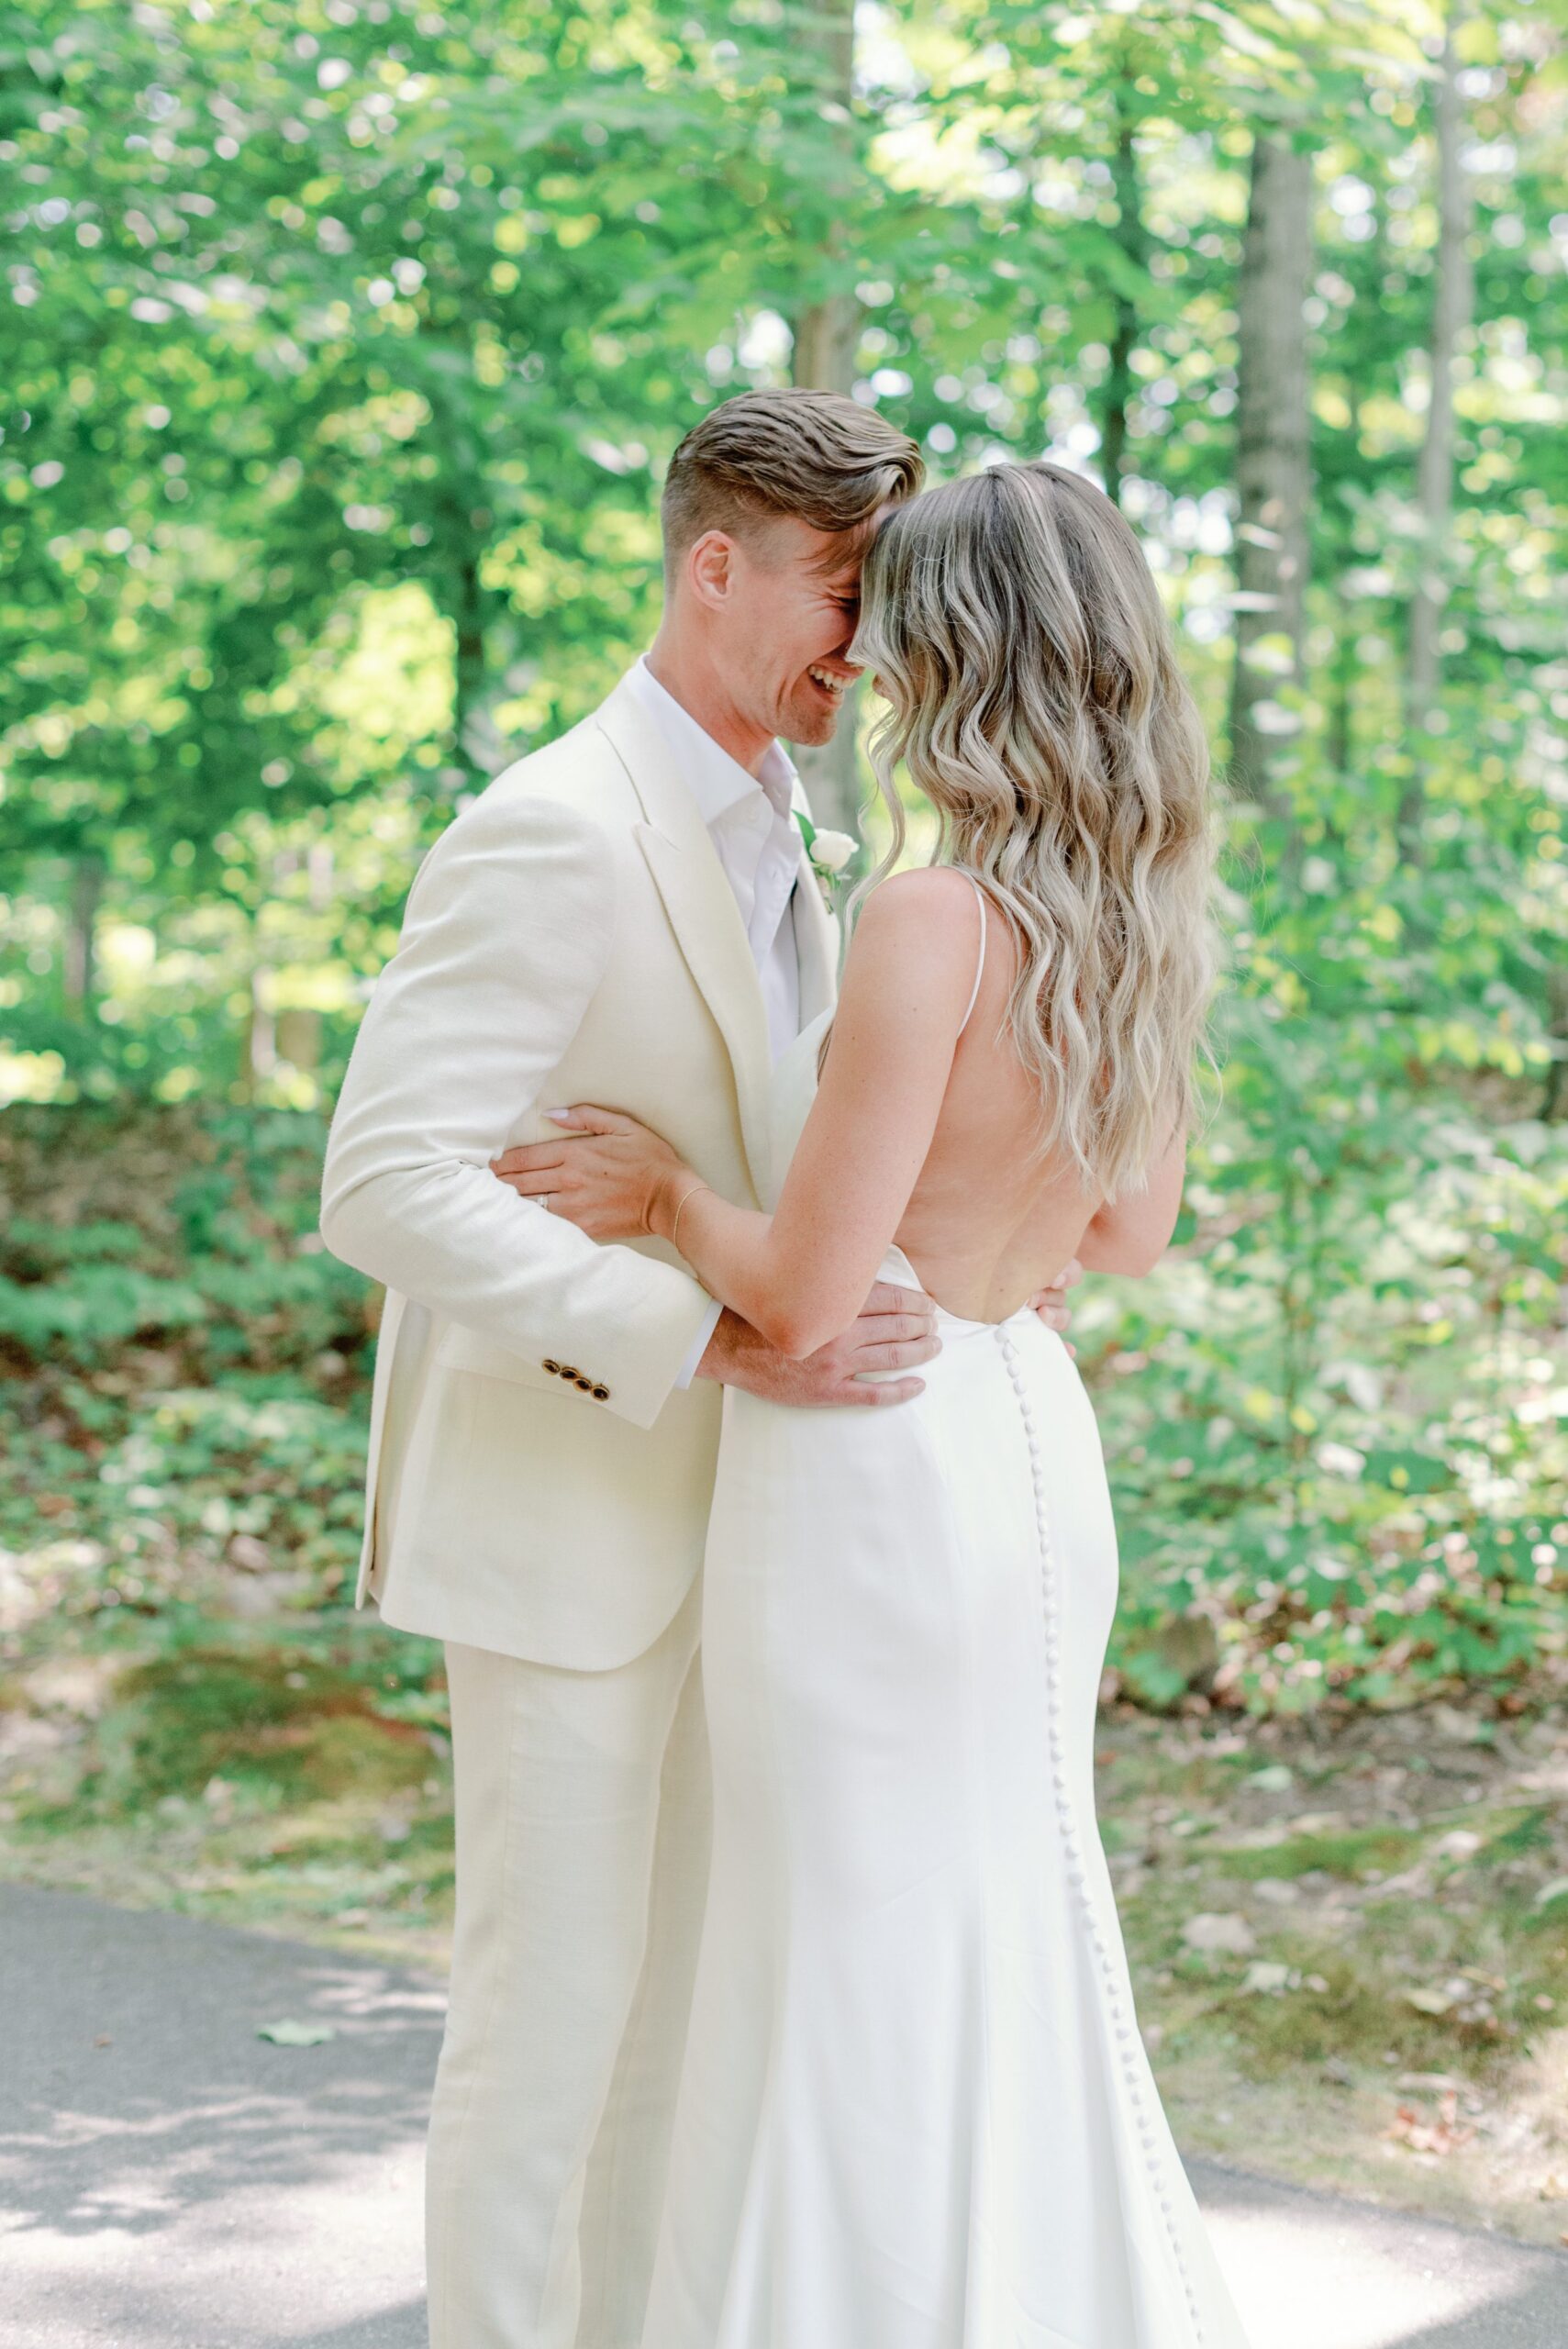 Intimate moment between bride and groom at outdoor wedding.